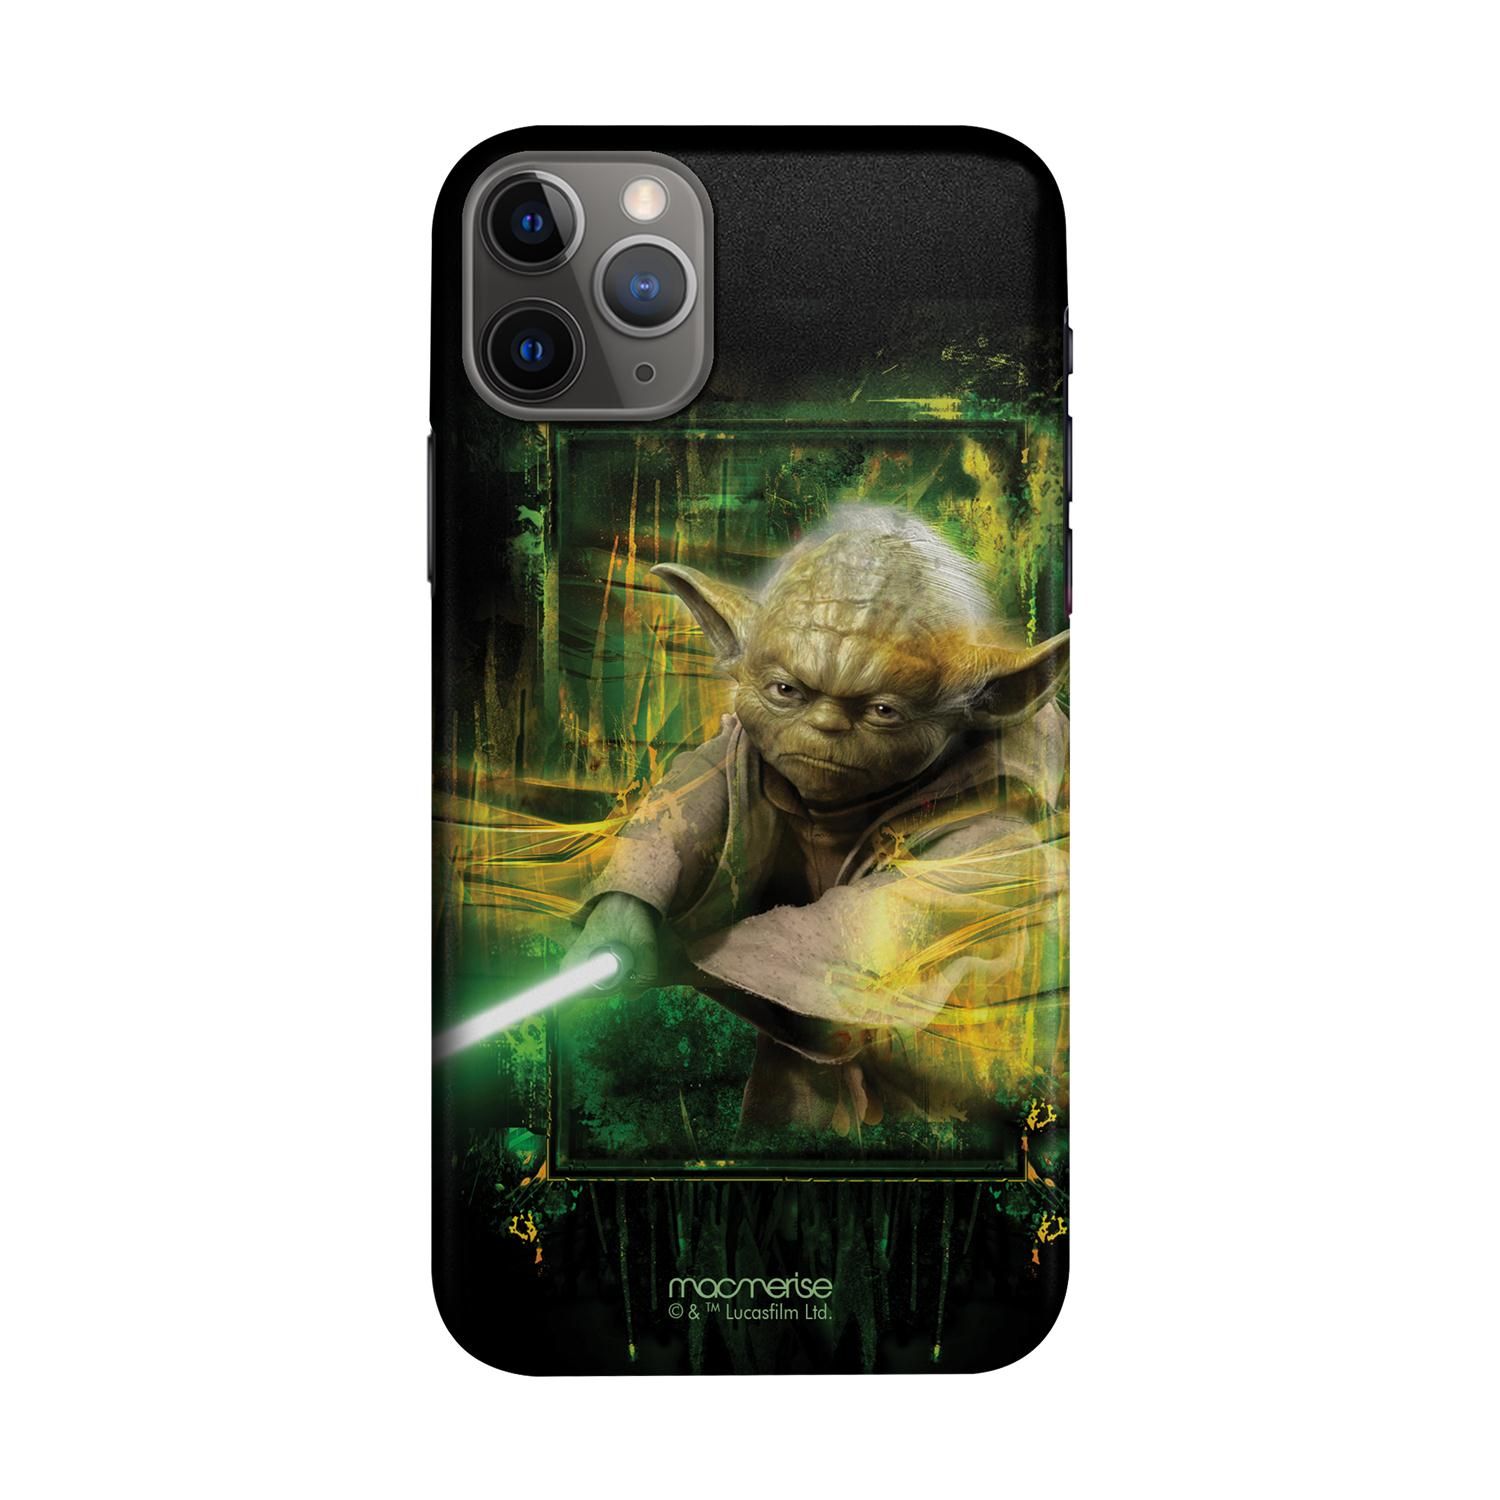 Buy Furious Yoda - Sleek Phone Case for iPhone 11 Pro Max Online